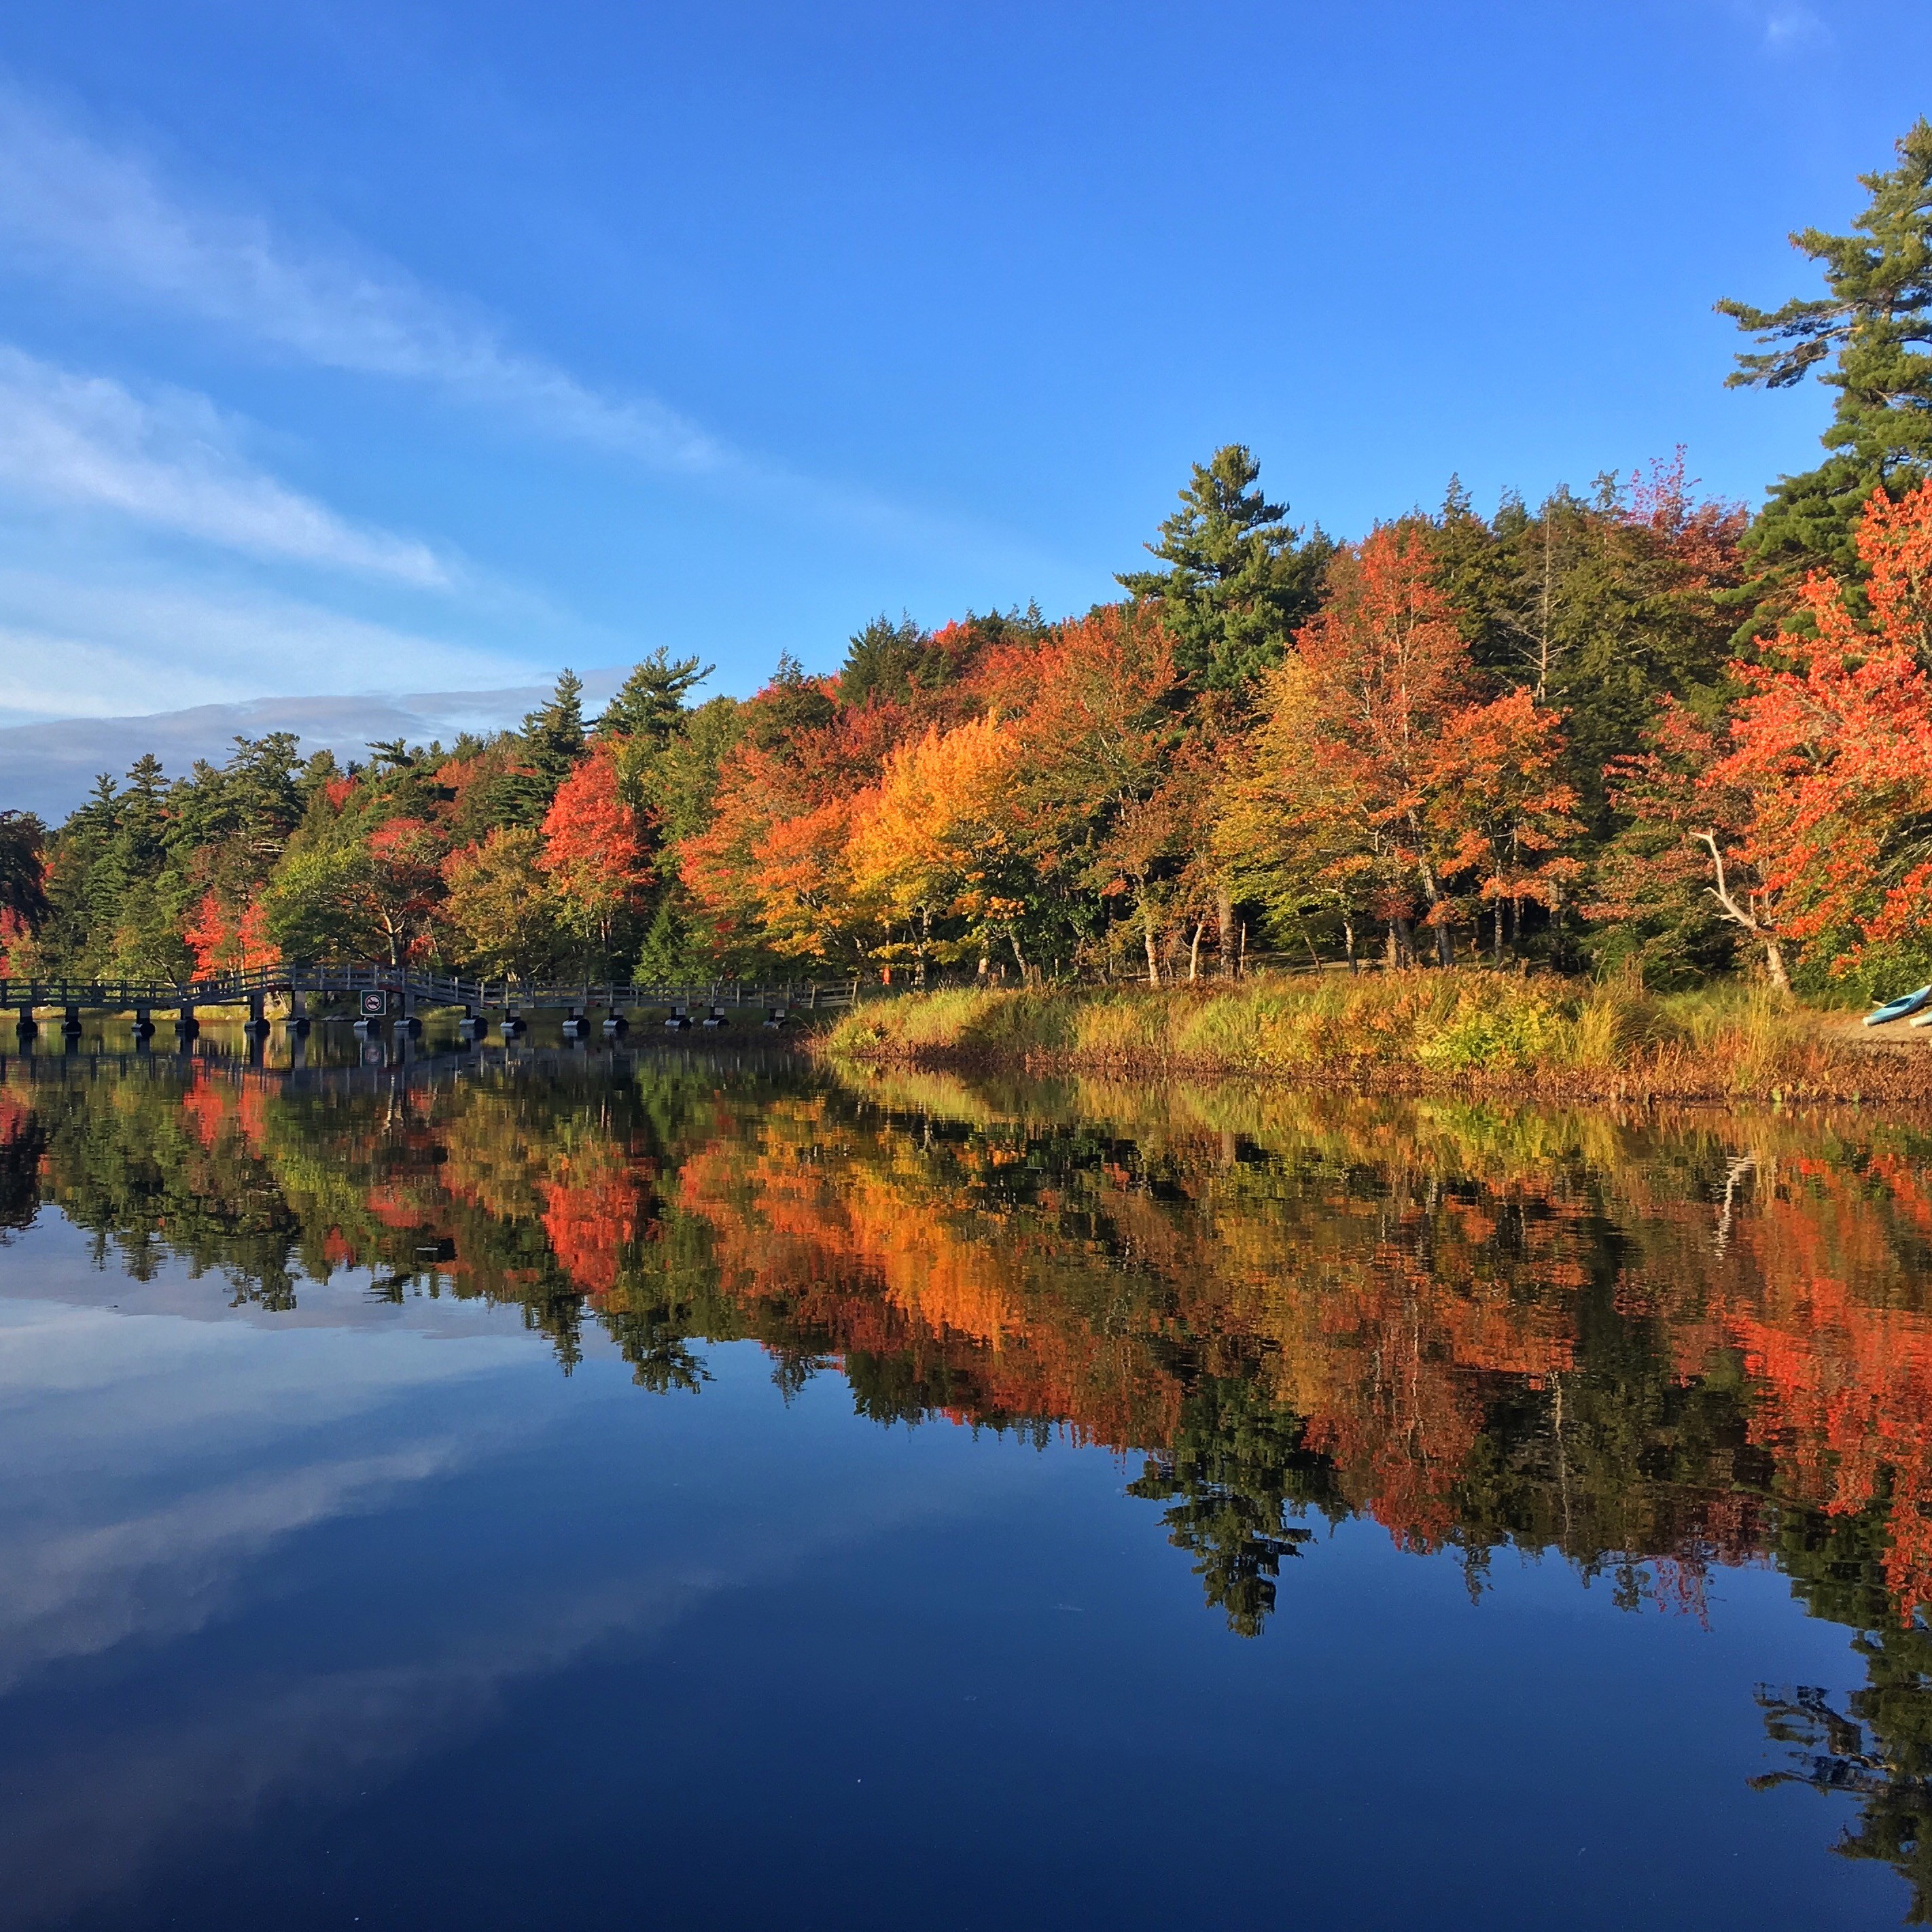 A guide to finding Nova Scotia’s best fall foliage | Environment ...